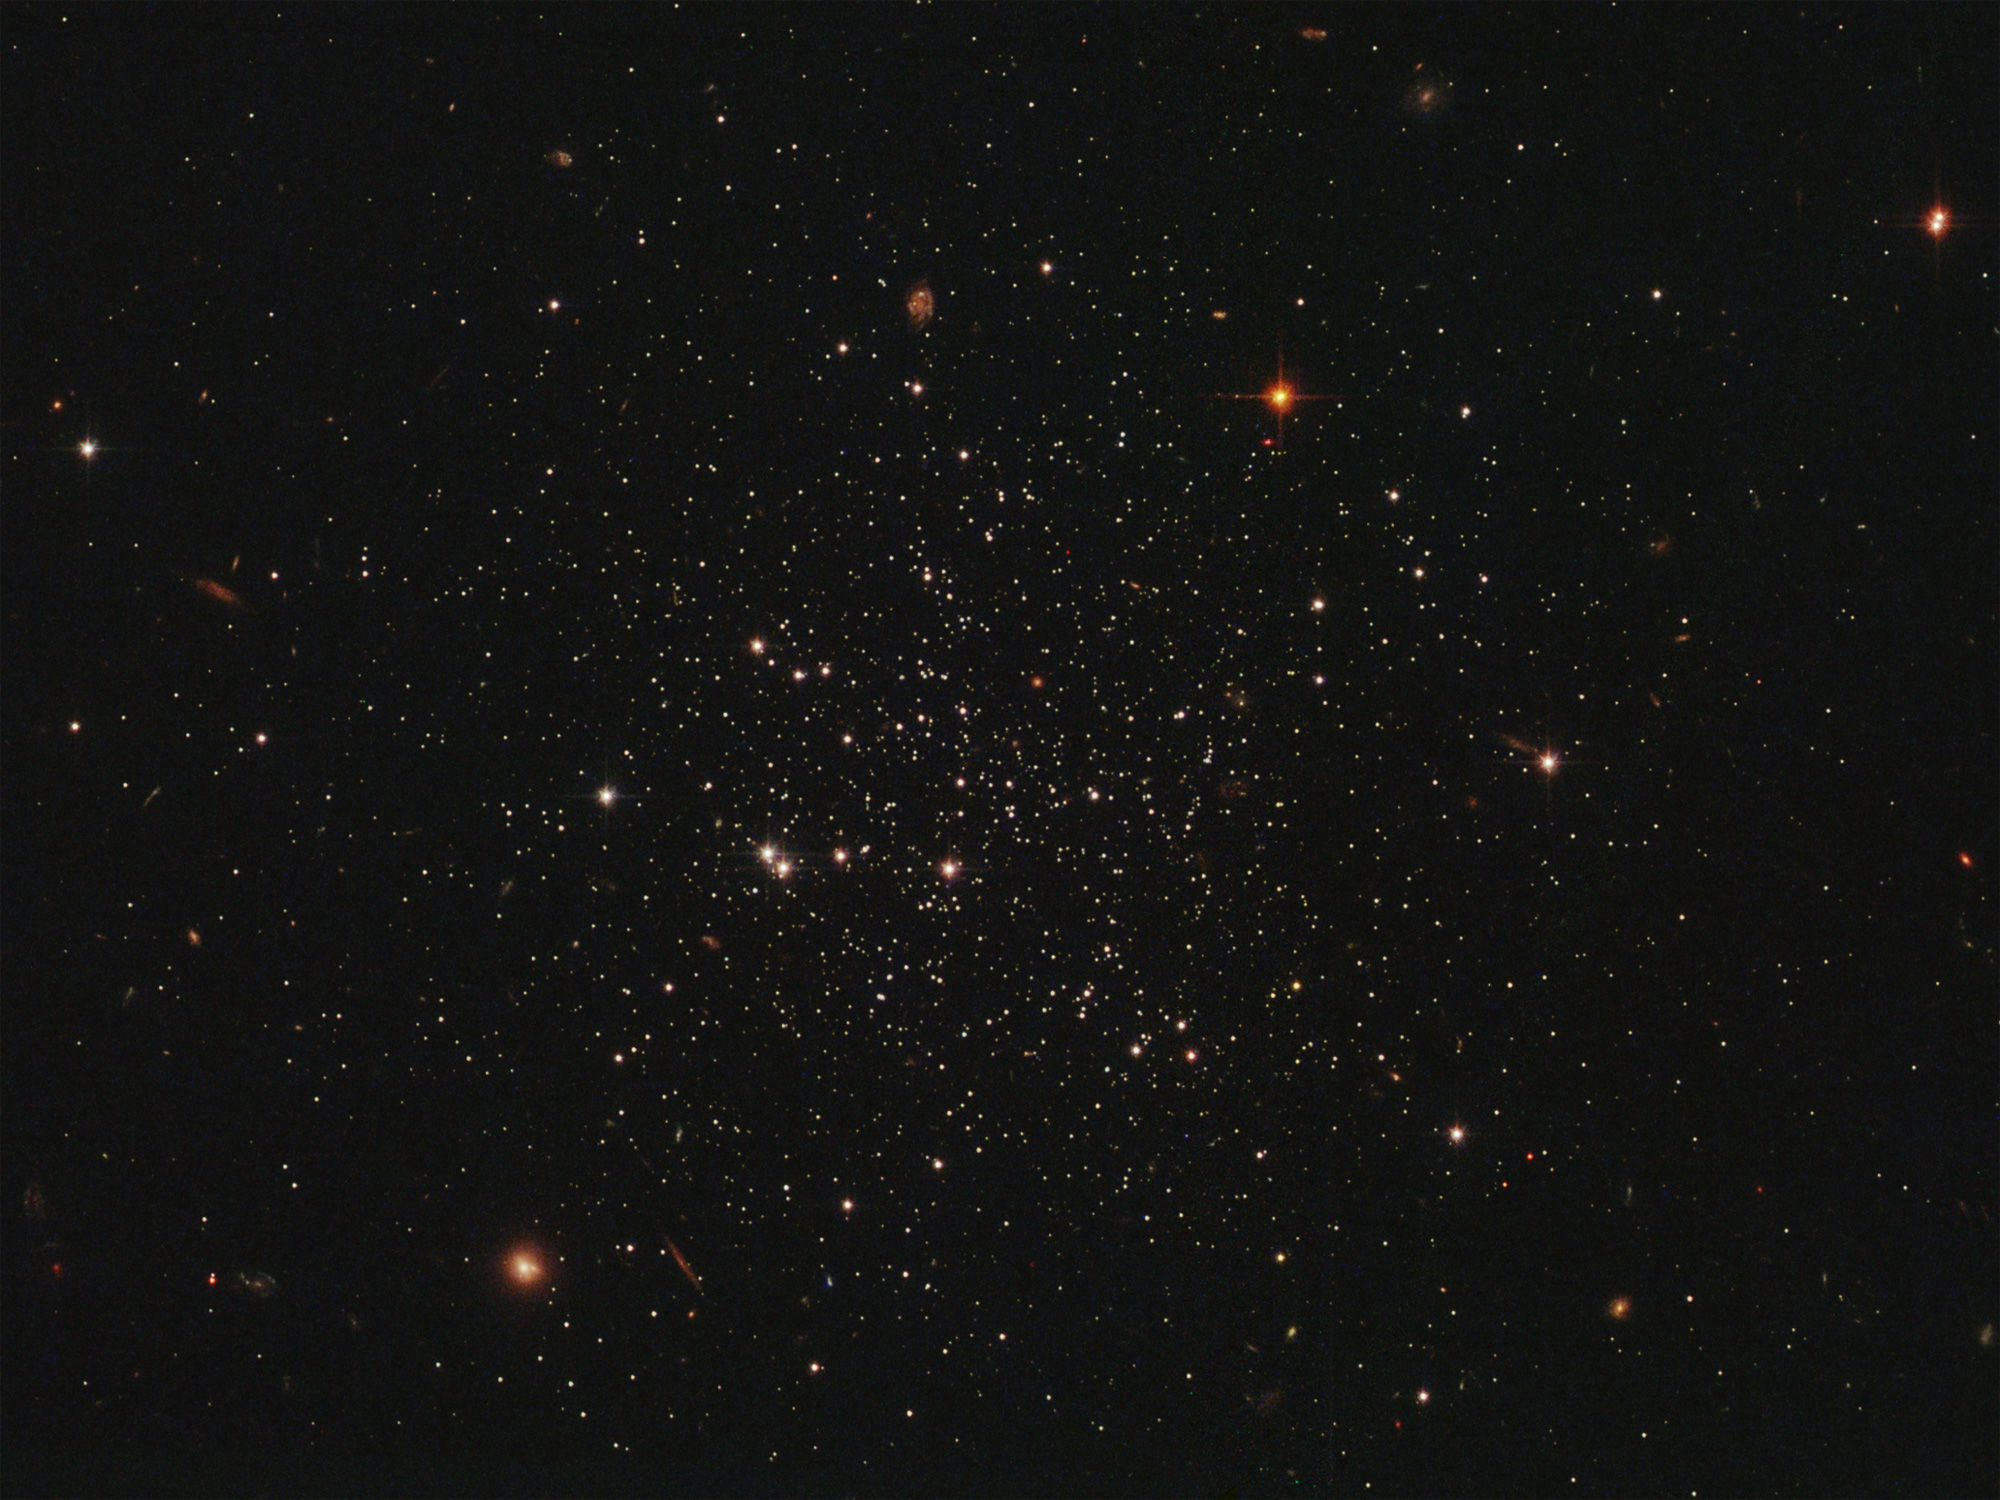 A Hubble image of PSO J174.0675-10.8774 goes much deeper and has higher resolution than ground-based images, showing more stars. Credit: NASA/ESA/Hubble and Judy Schmidt